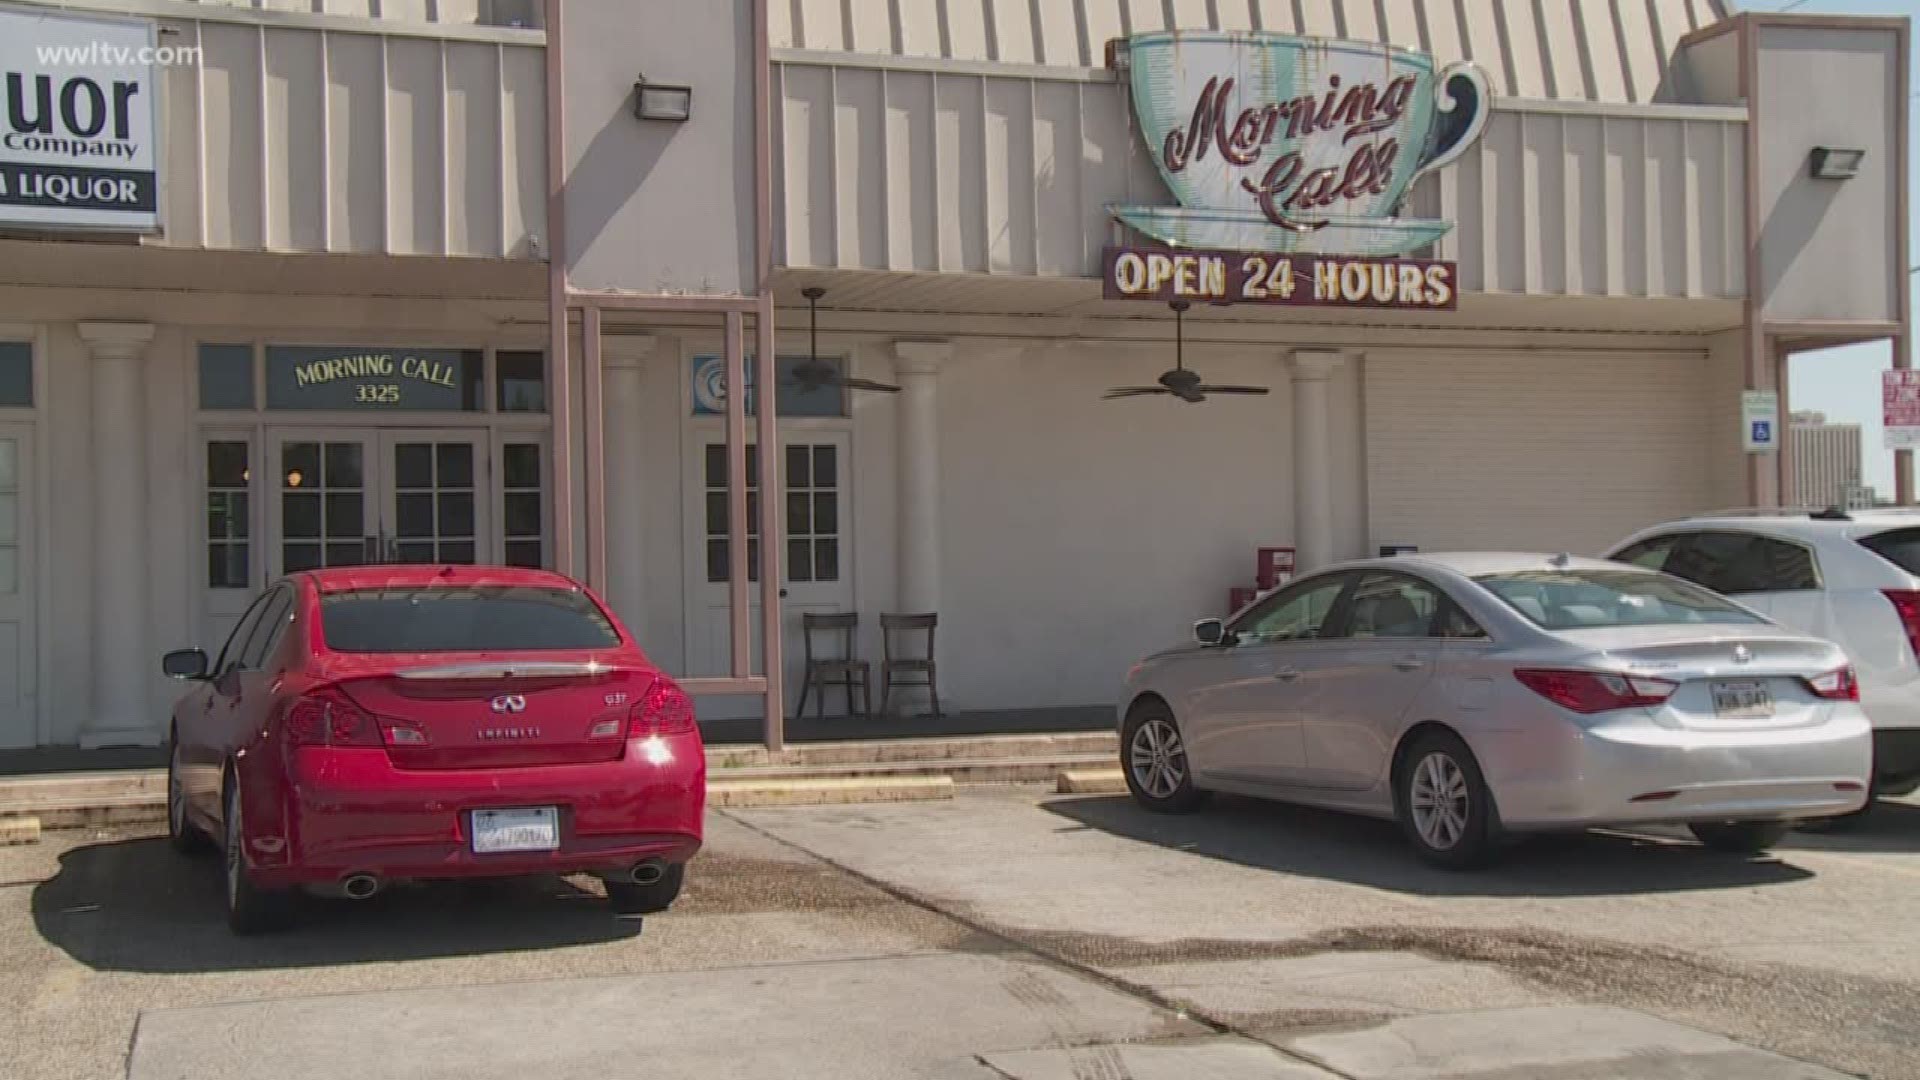 Business owners say they will now focus on their City Park location.